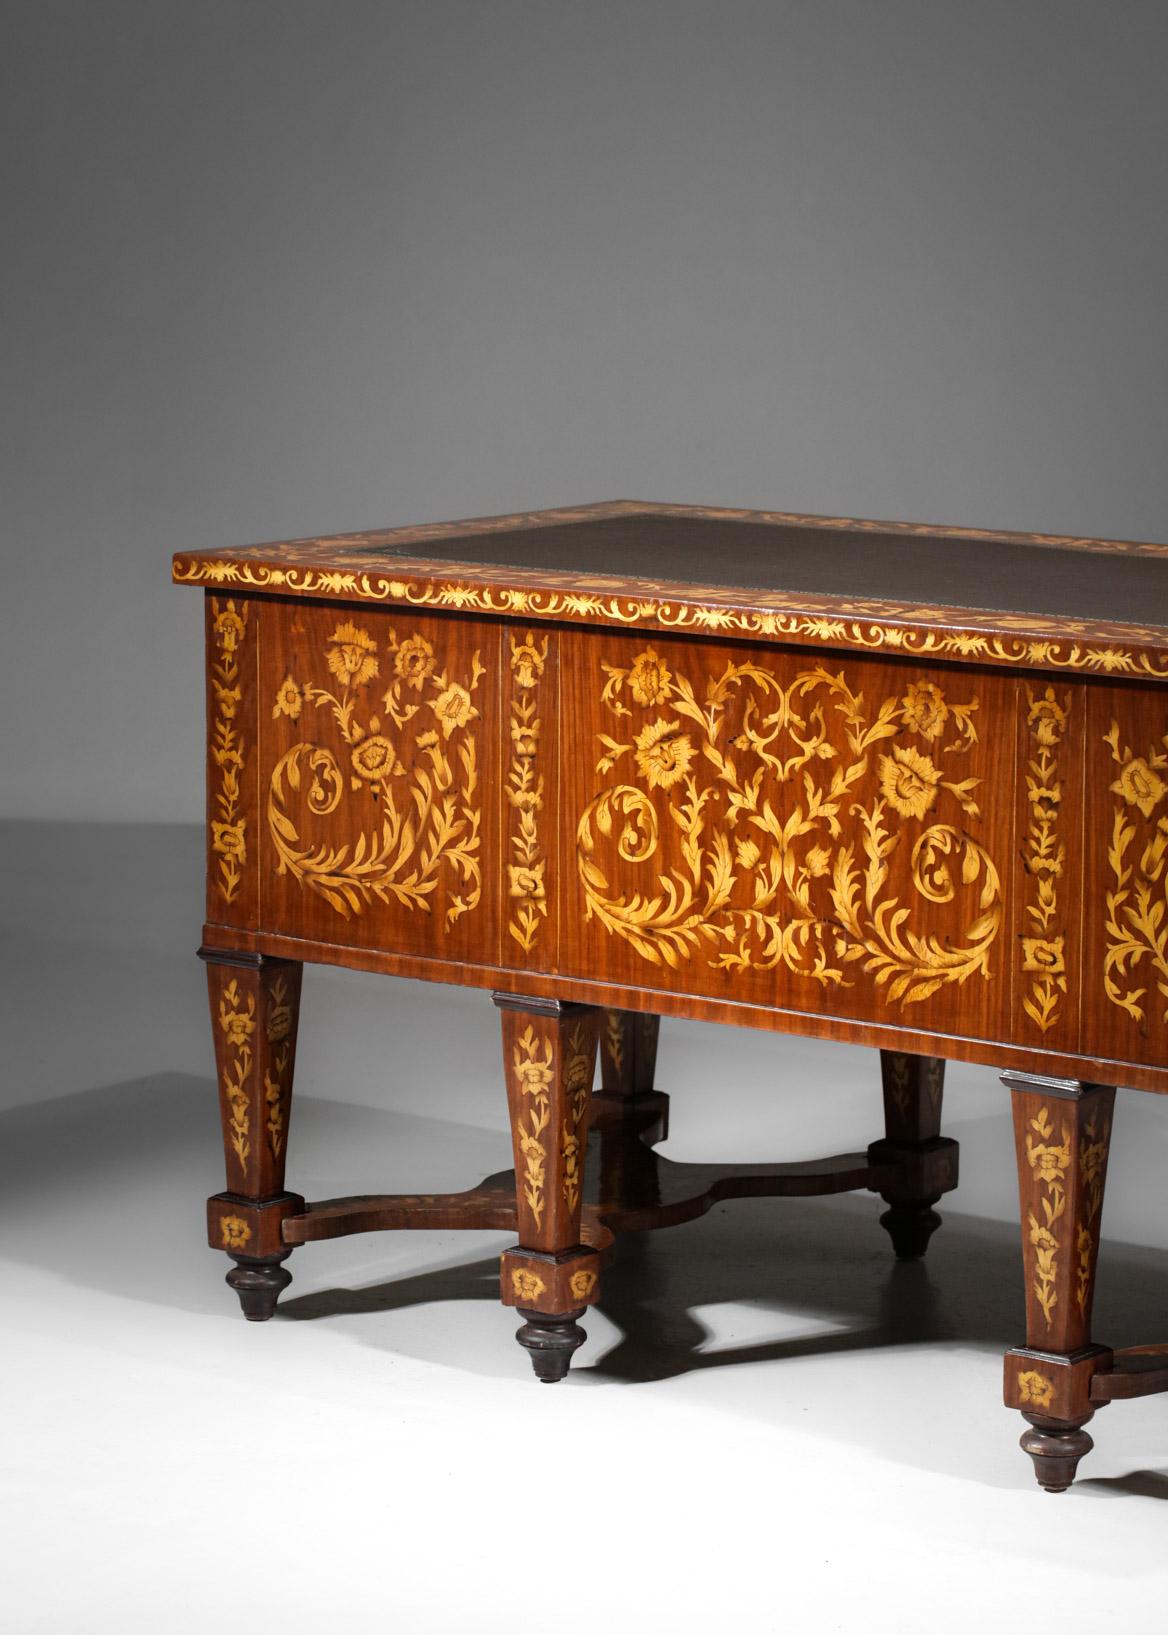 Mazarin Style Desk in Solid Wood and Floral Marquetry, F419 9